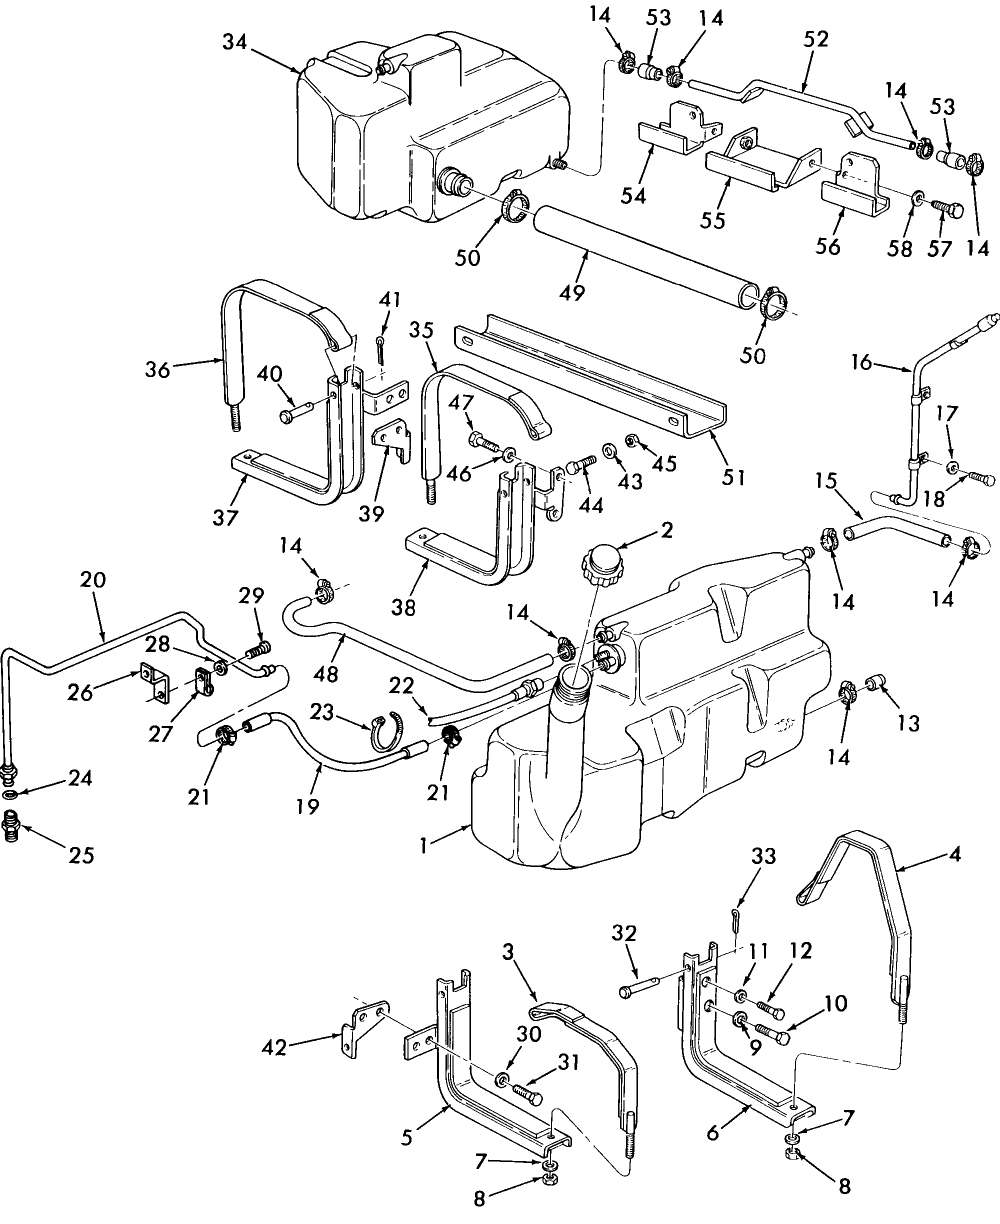 09A06 FUEL SYSTEM W/AUXILIARY TANK (10-85/)